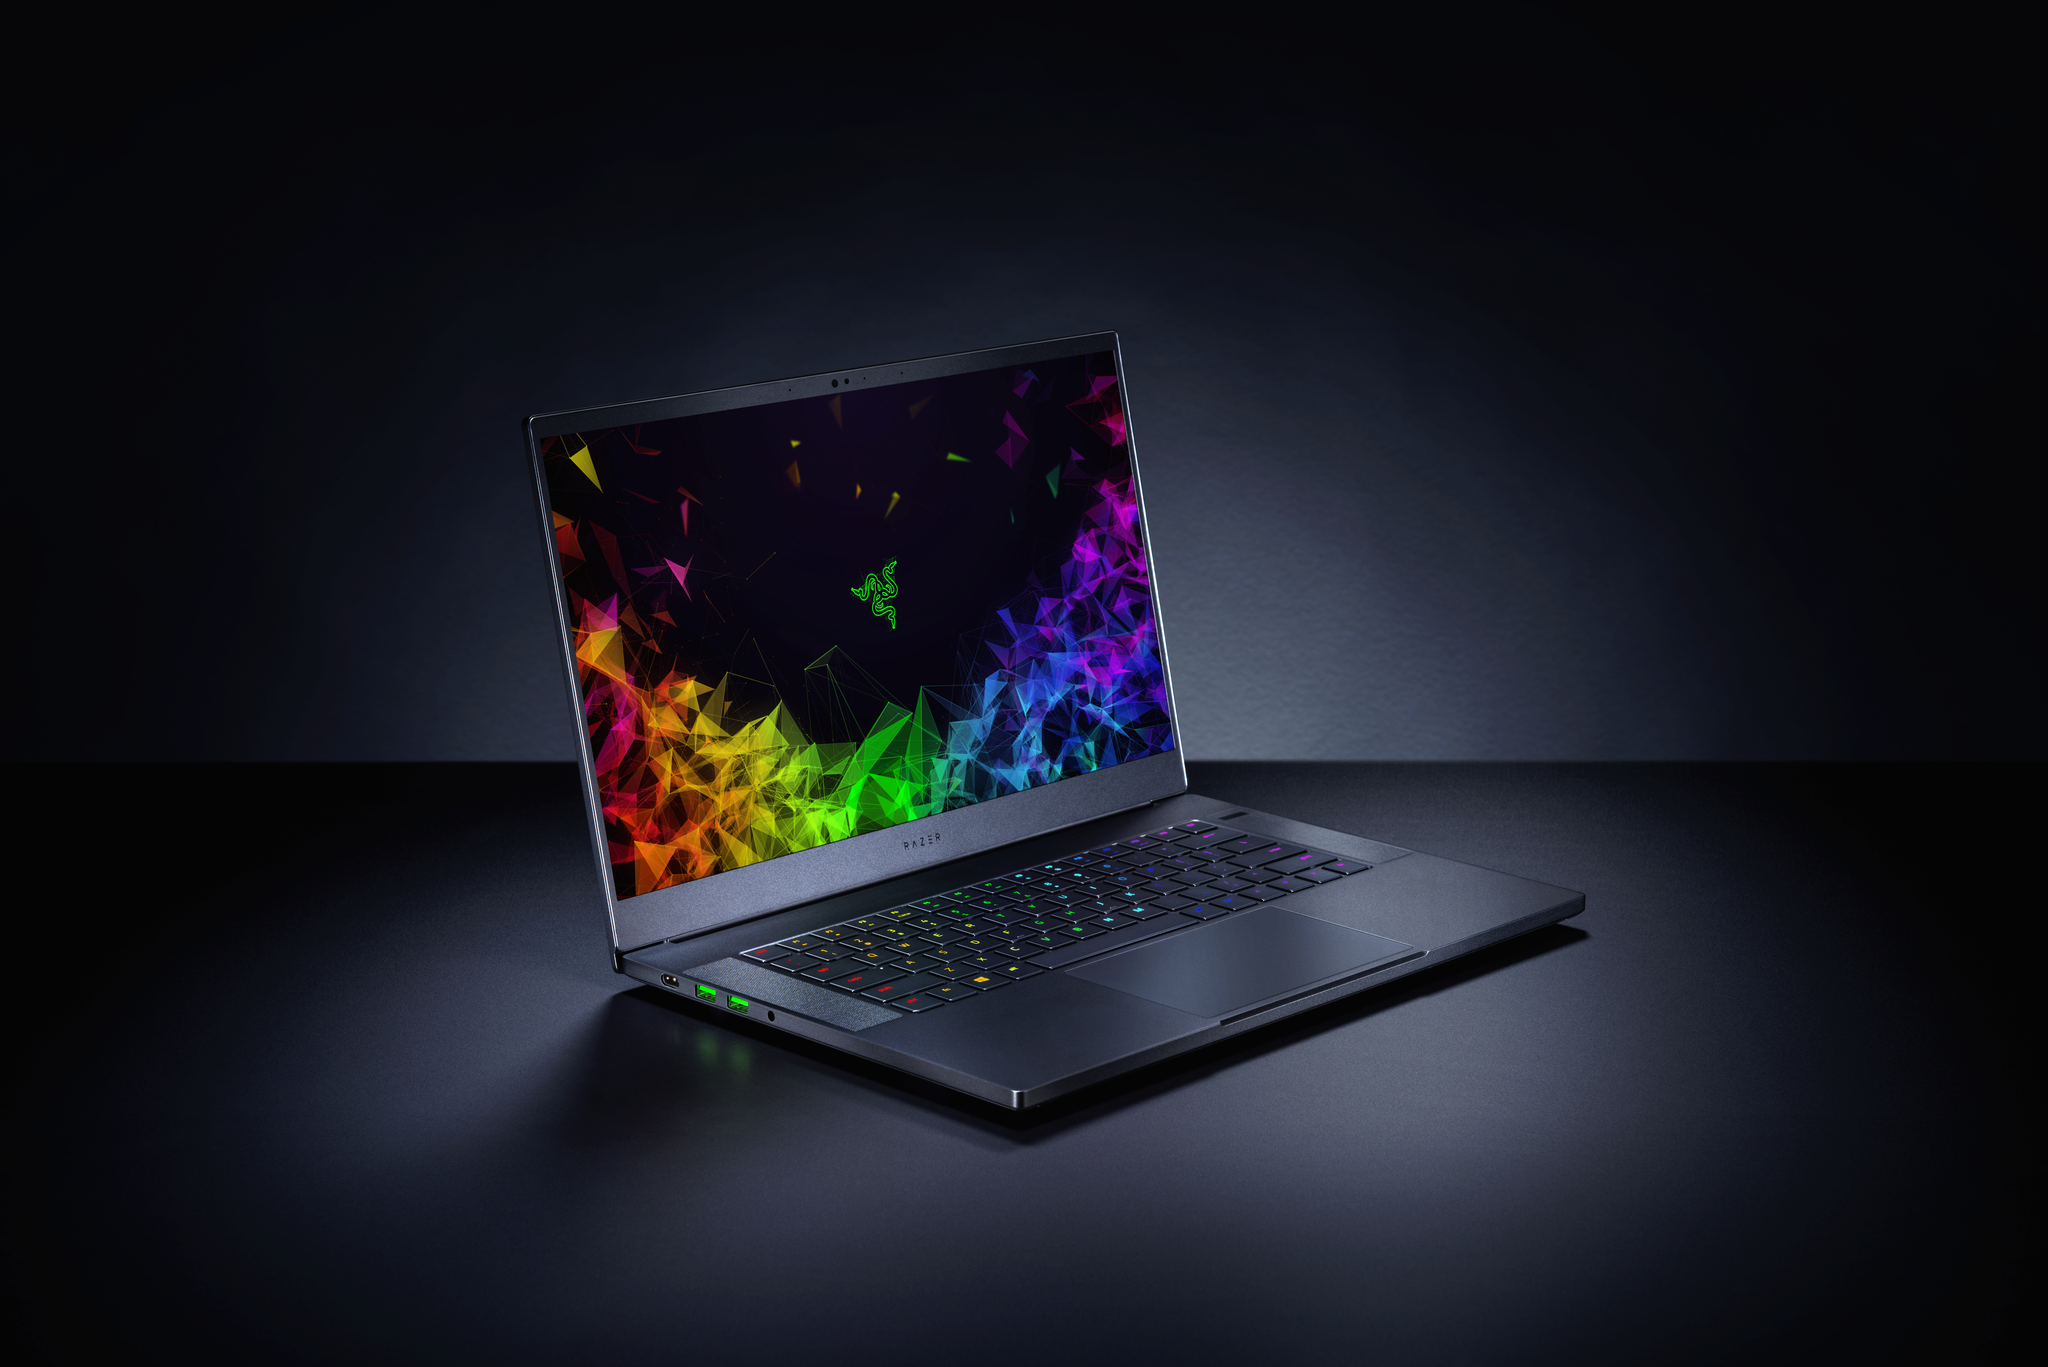 Image for Nvidia's high-spec RTX graphics hardware with ray-tracing is coming to laptops